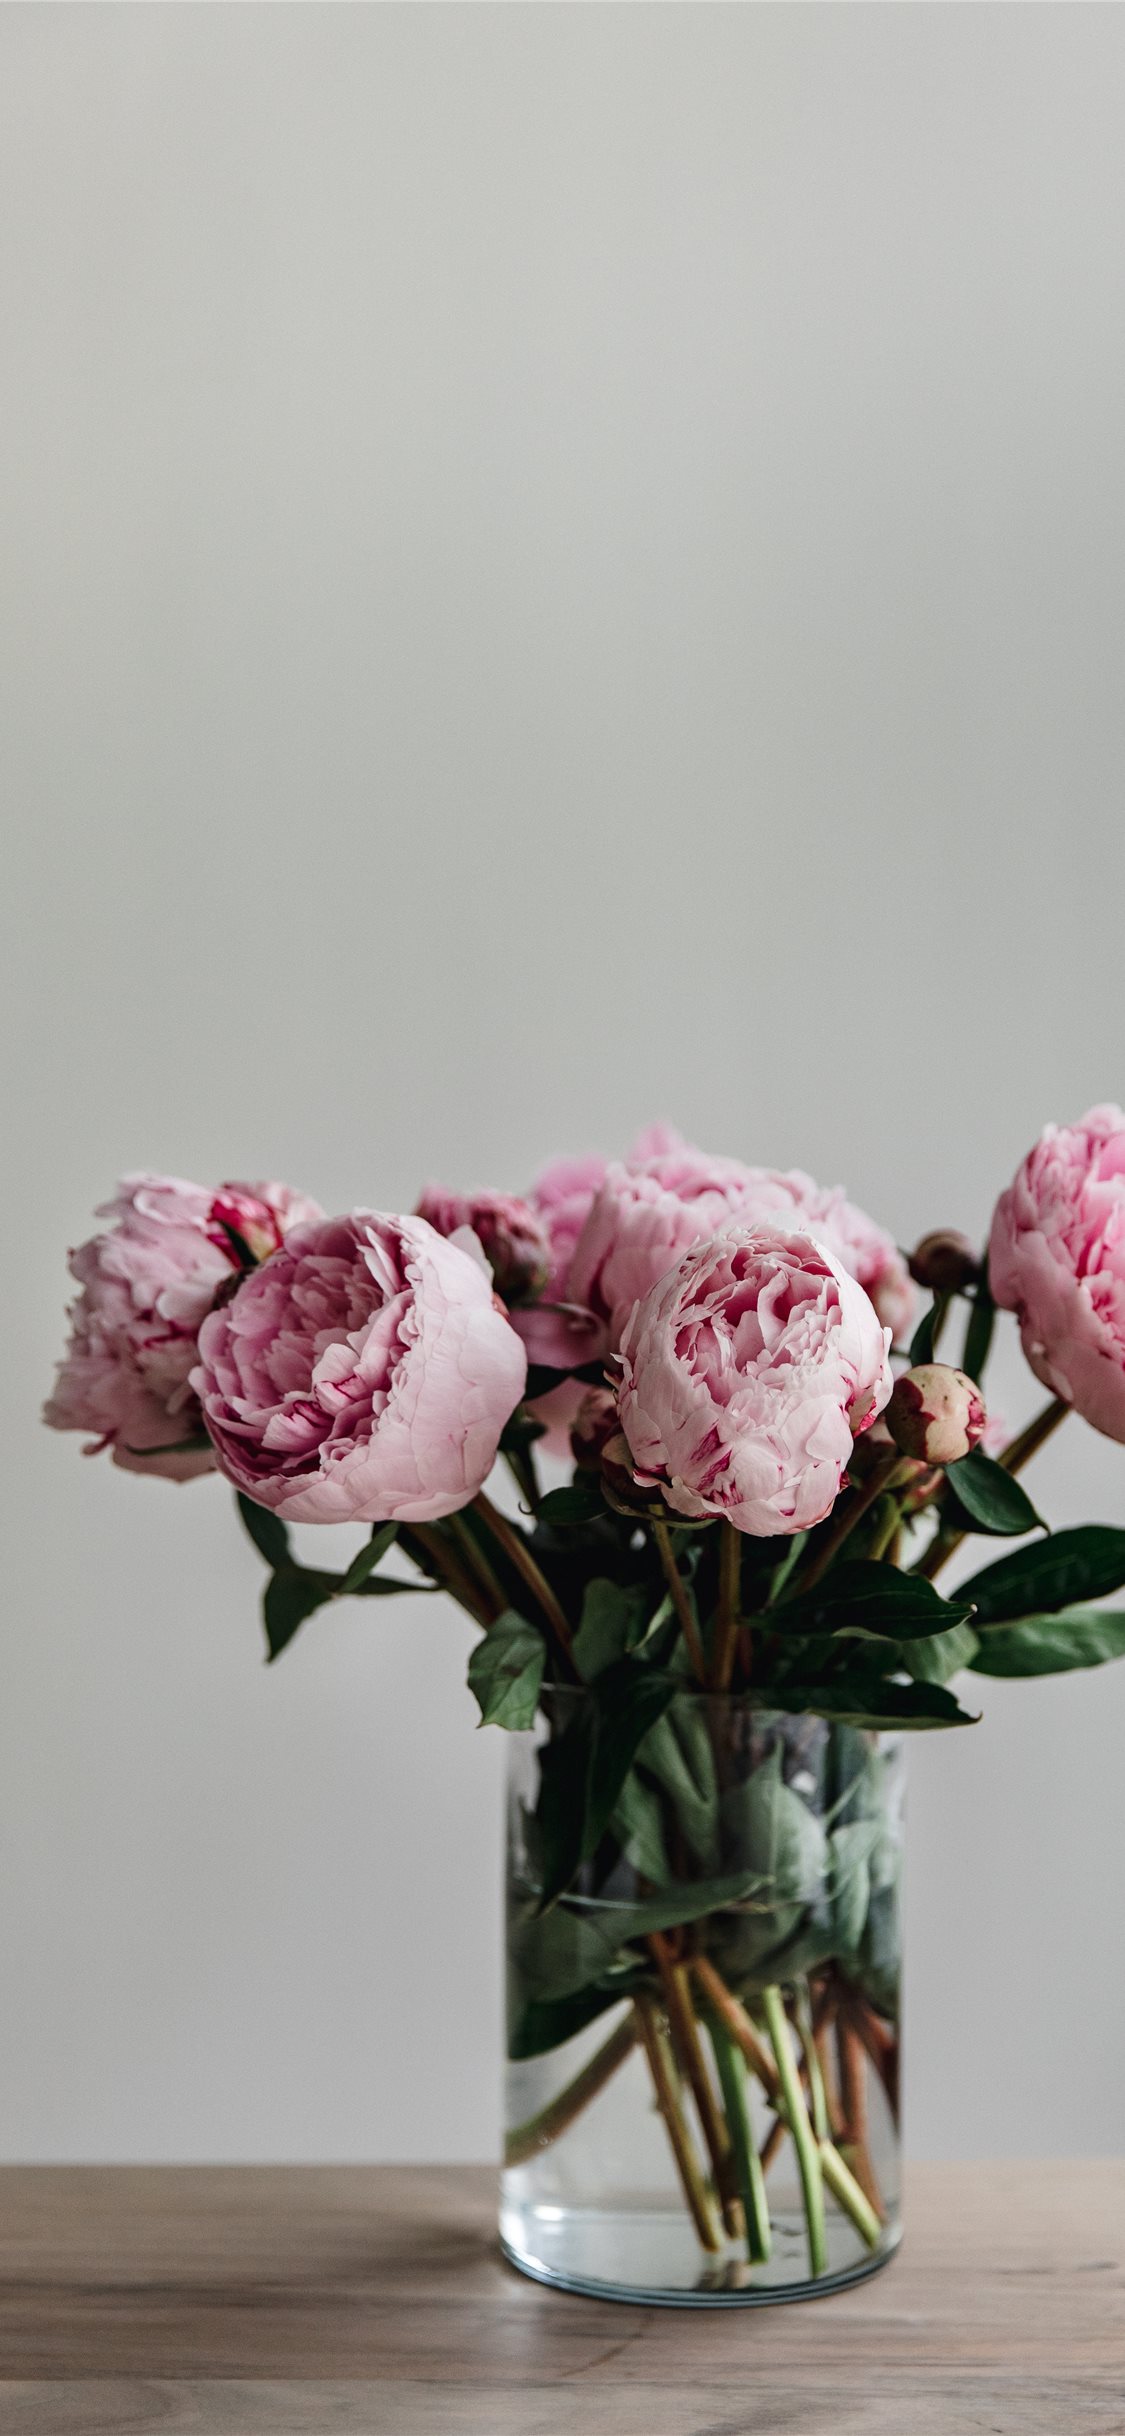 This simple image of a bunch of peonies in a vase ... iPhone X Wallpapers  Free Download